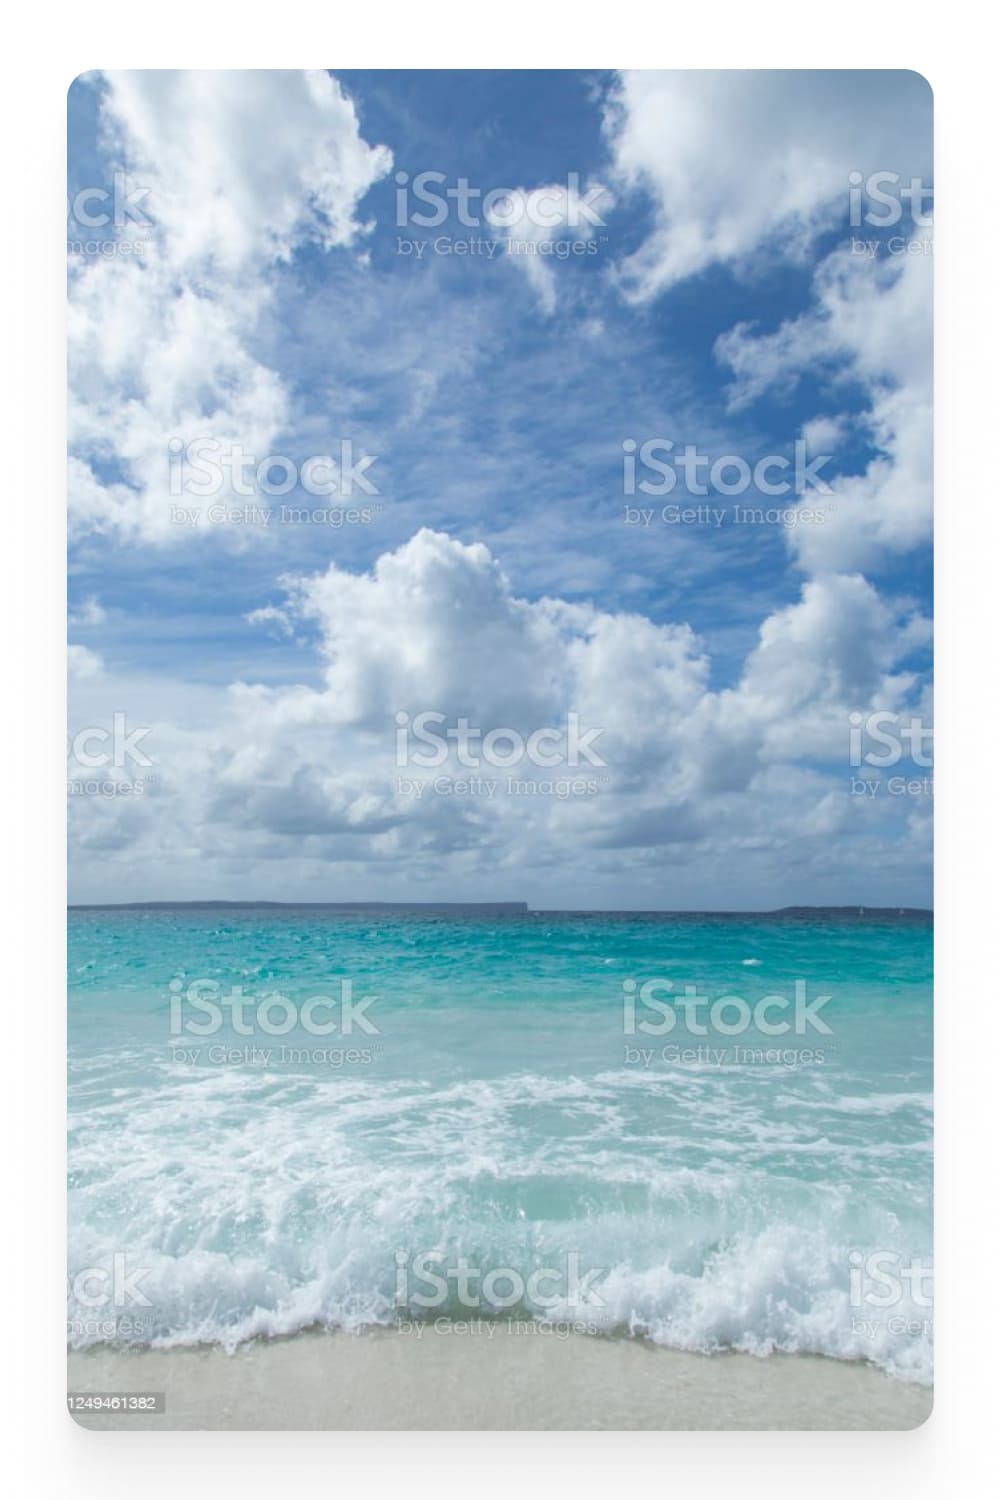 Photo of the beach and the sky with clouds.